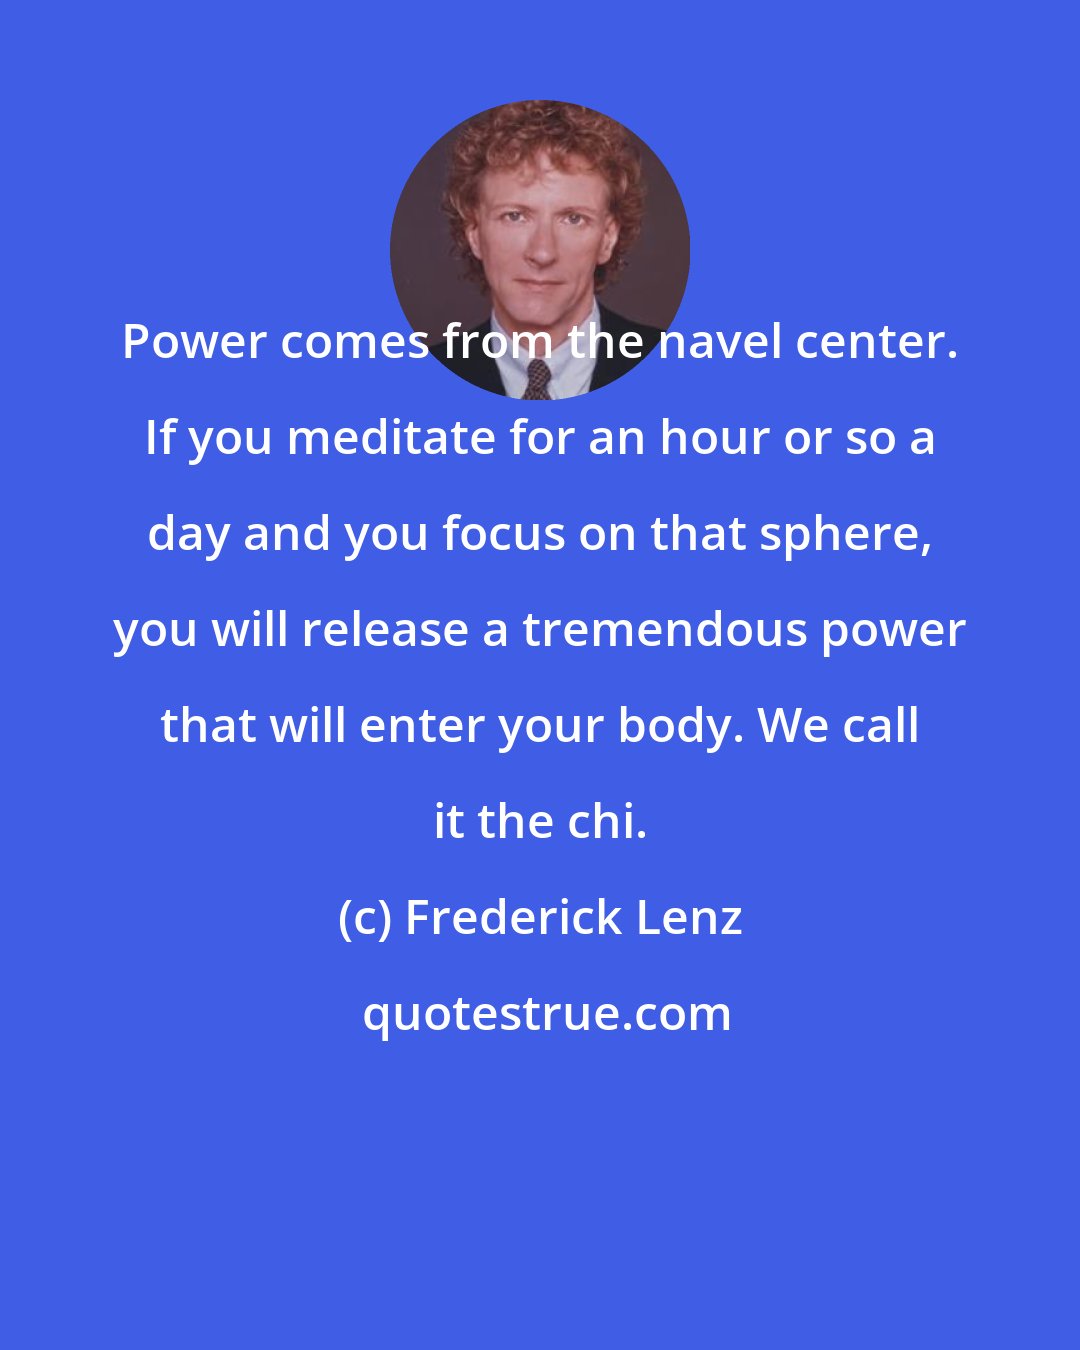 Frederick Lenz: Power comes from the navel center. If you meditate for an hour or so a day and you focus on that sphere, you will release a tremendous power that will enter your body. We call it the chi.